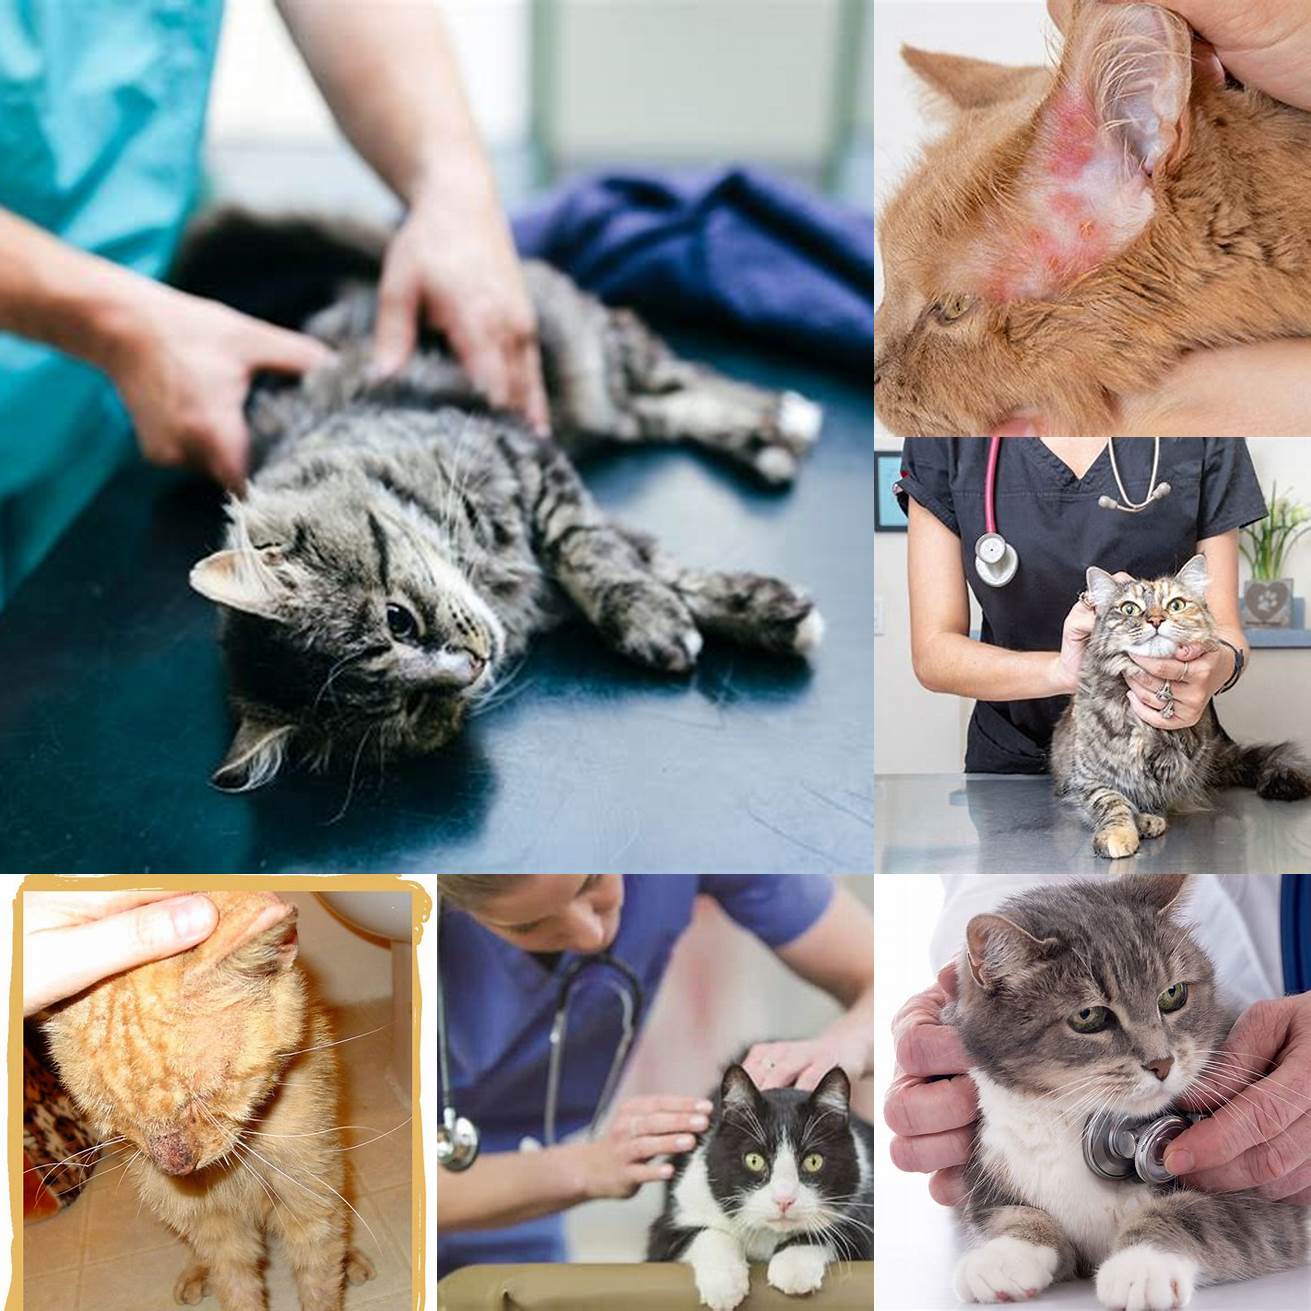 Take your cat to the vet if you notice any signs of mange Early diagnosis and treatment can help to prevent the spread of mange and other skin conditions